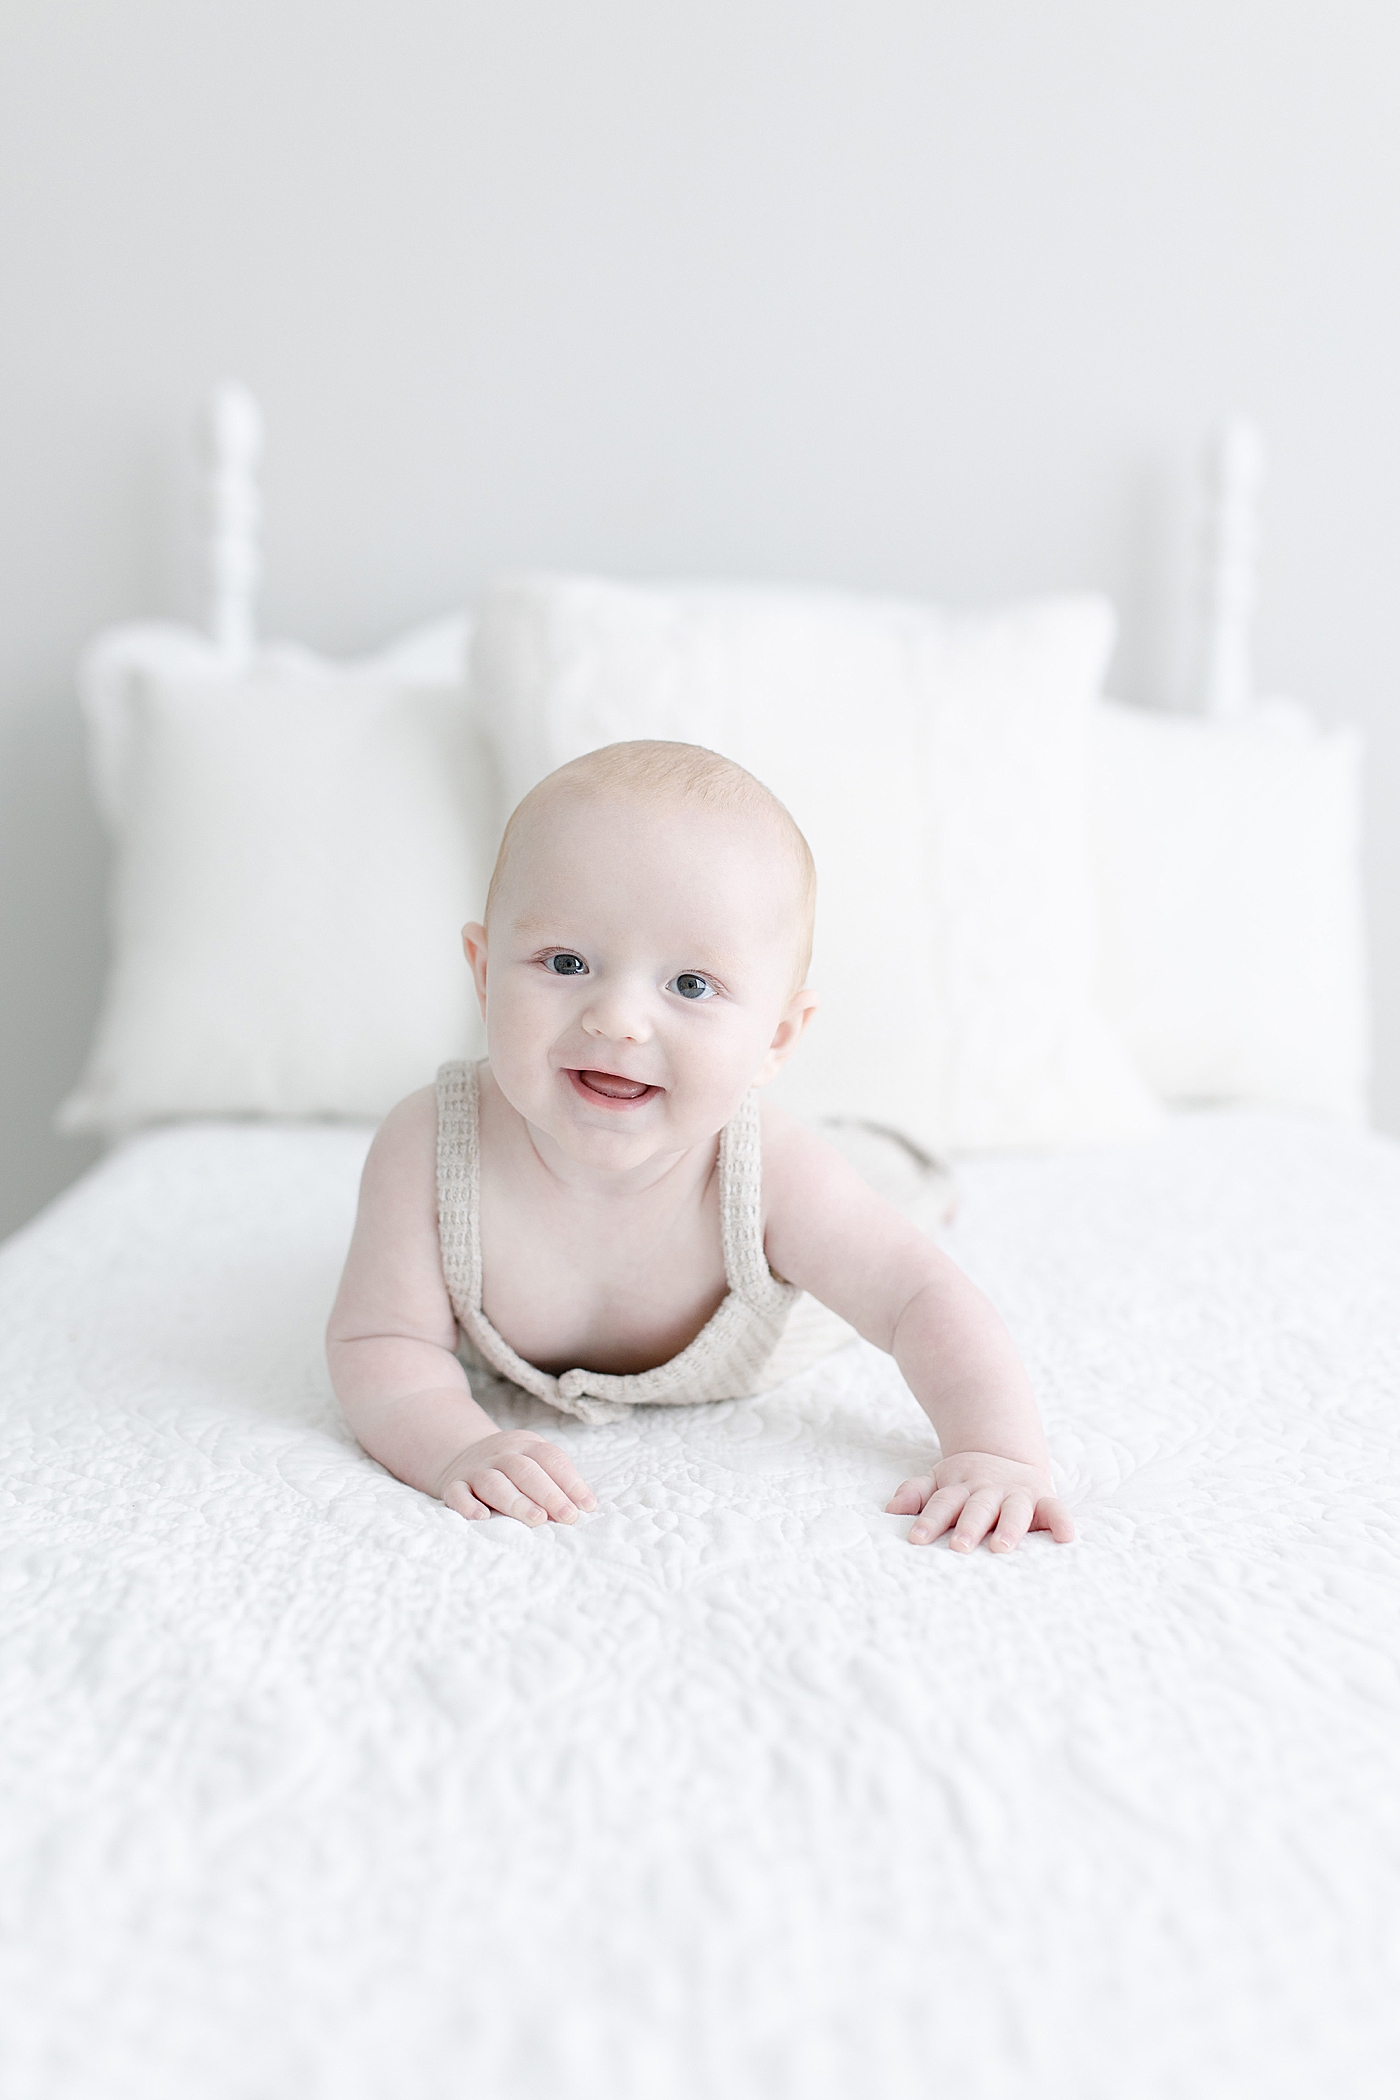 Baby boy laying on his stomach for milestone photos. Photo by Little Sunshine Photography